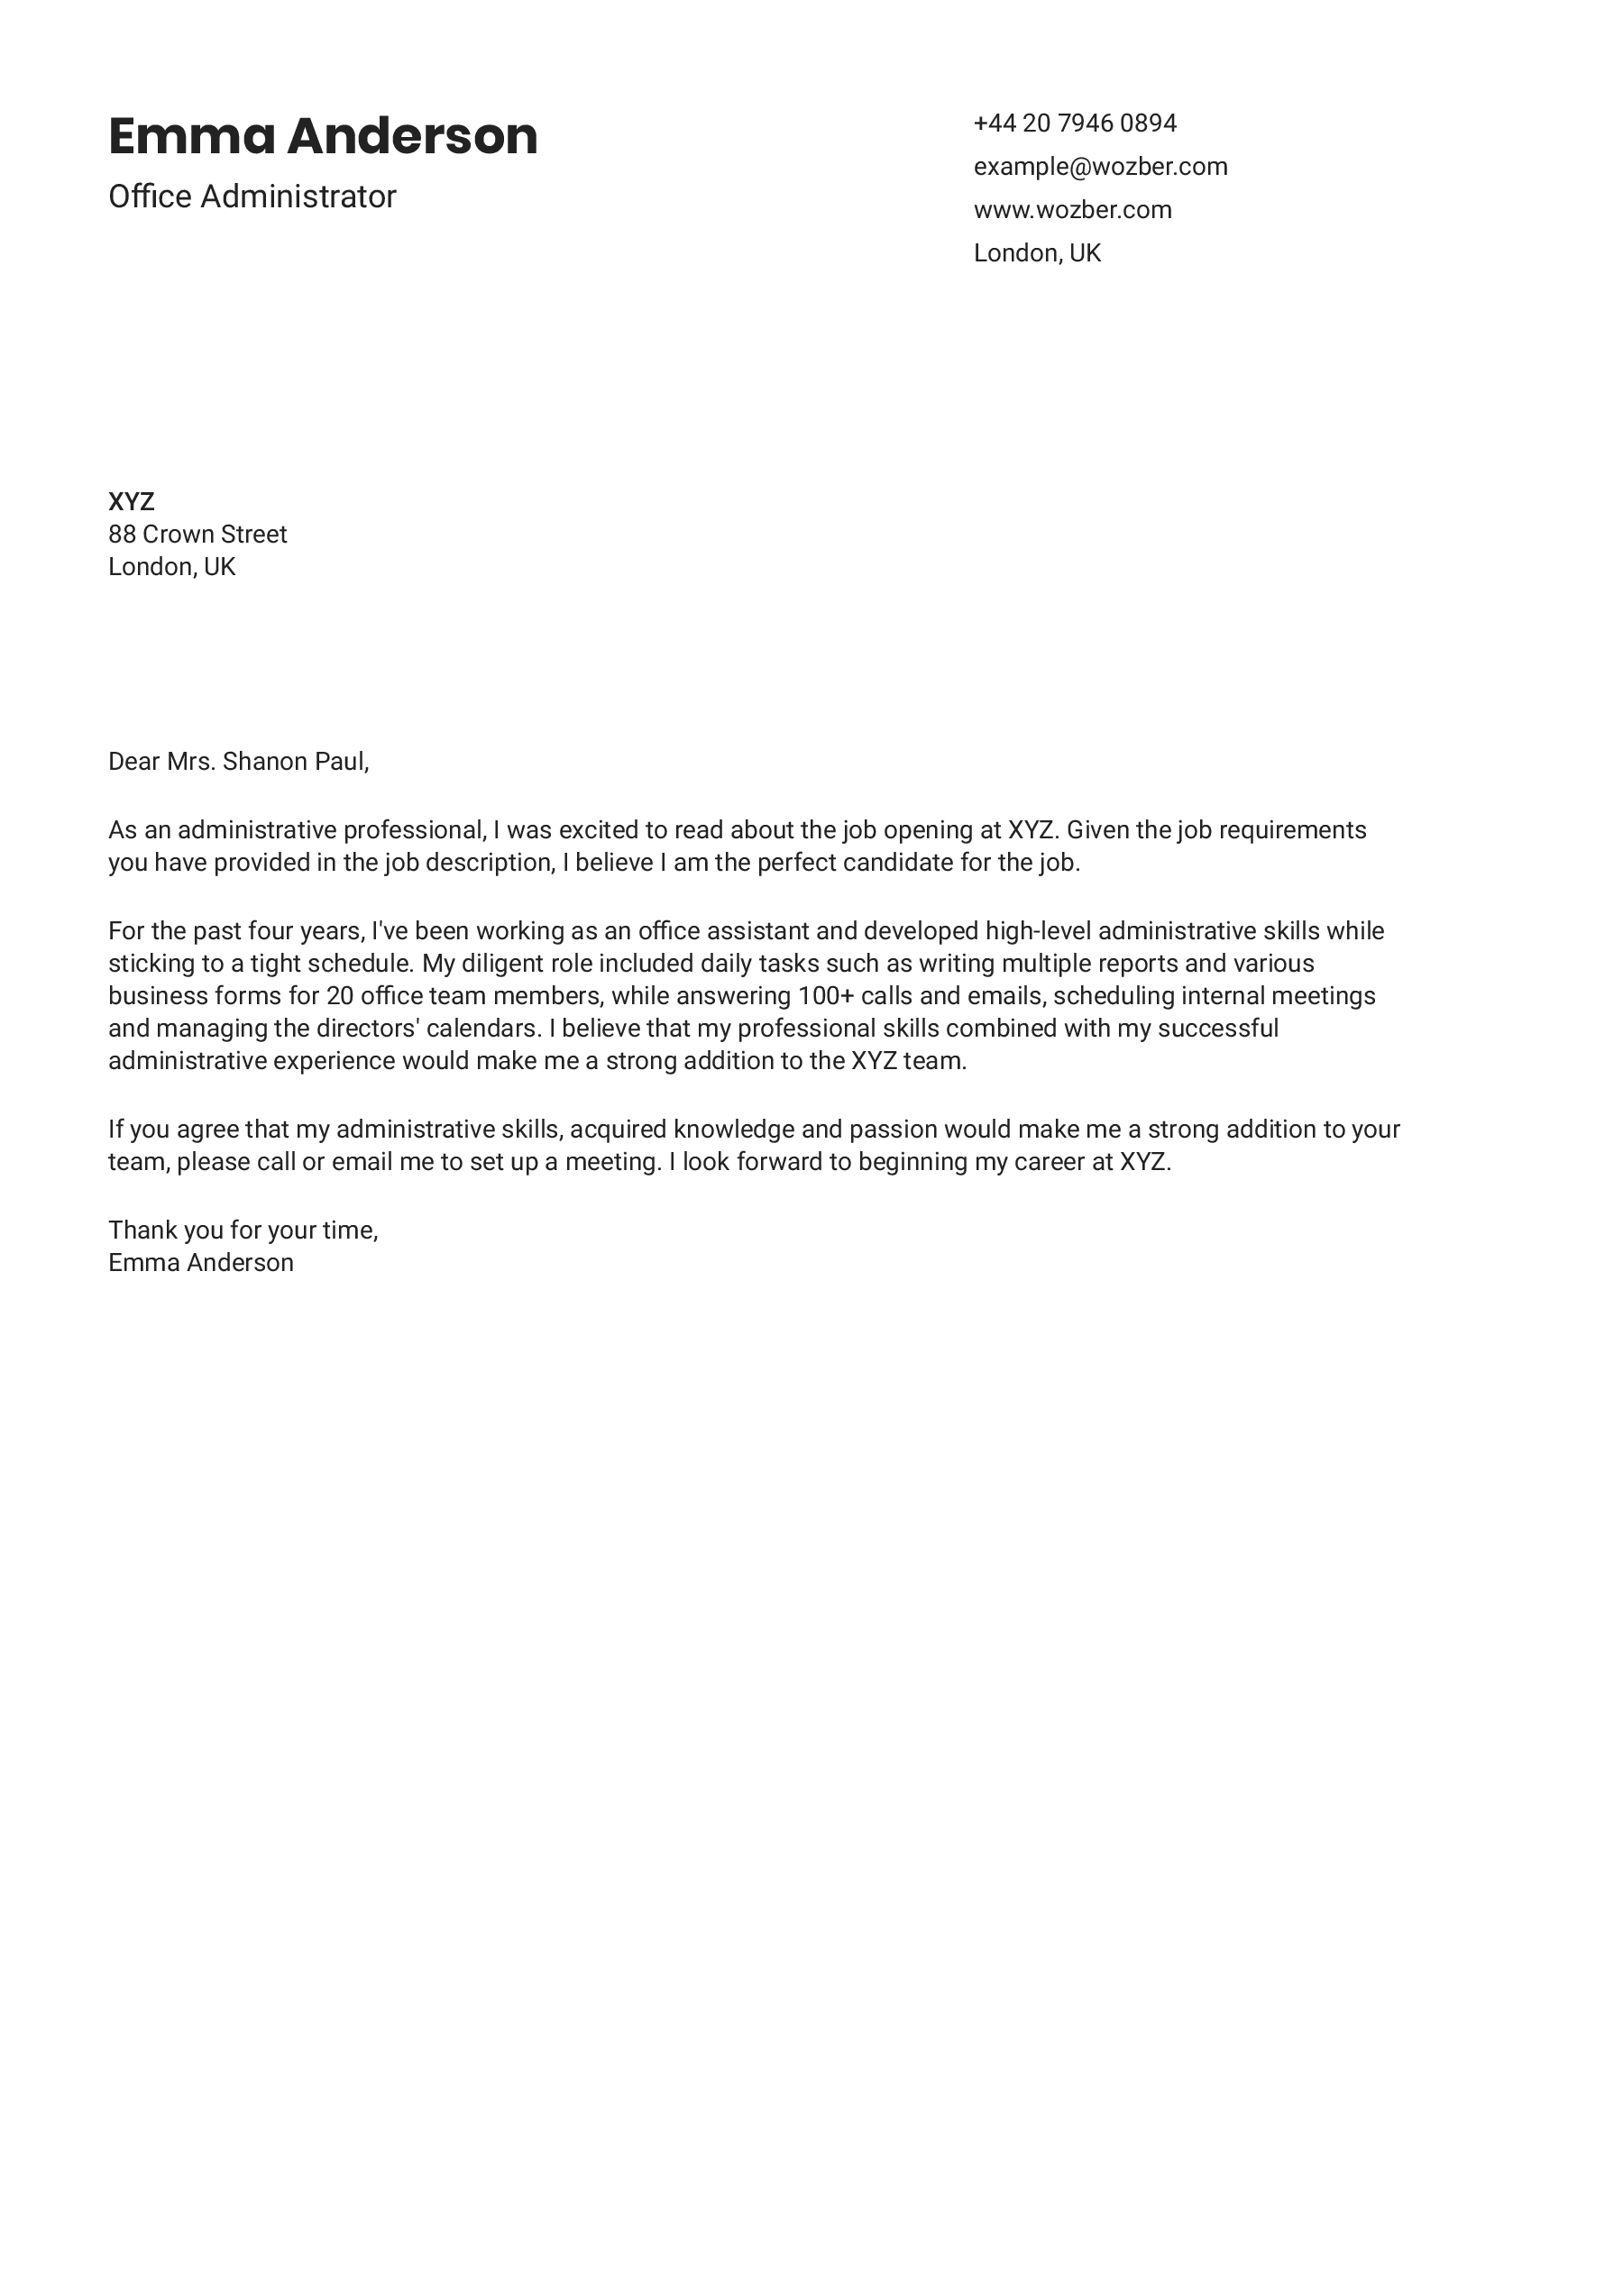 Modern cover letter example for Office Administrator position